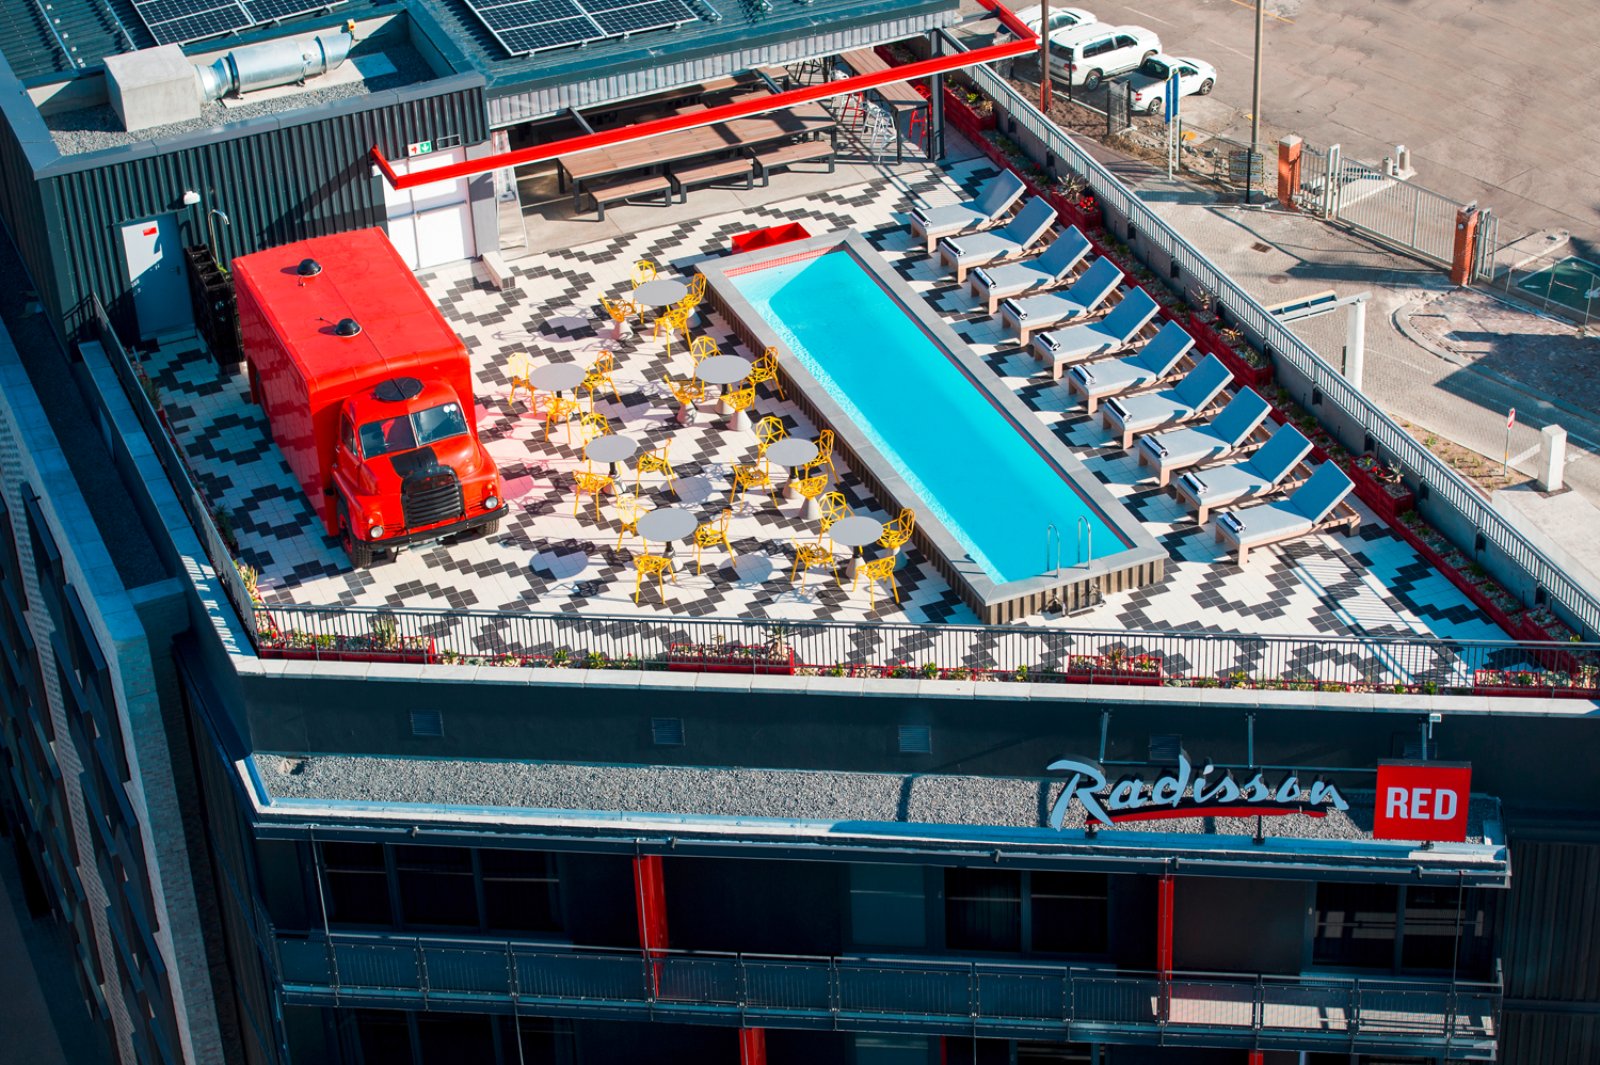 Radisson Red V&A Waterfront 